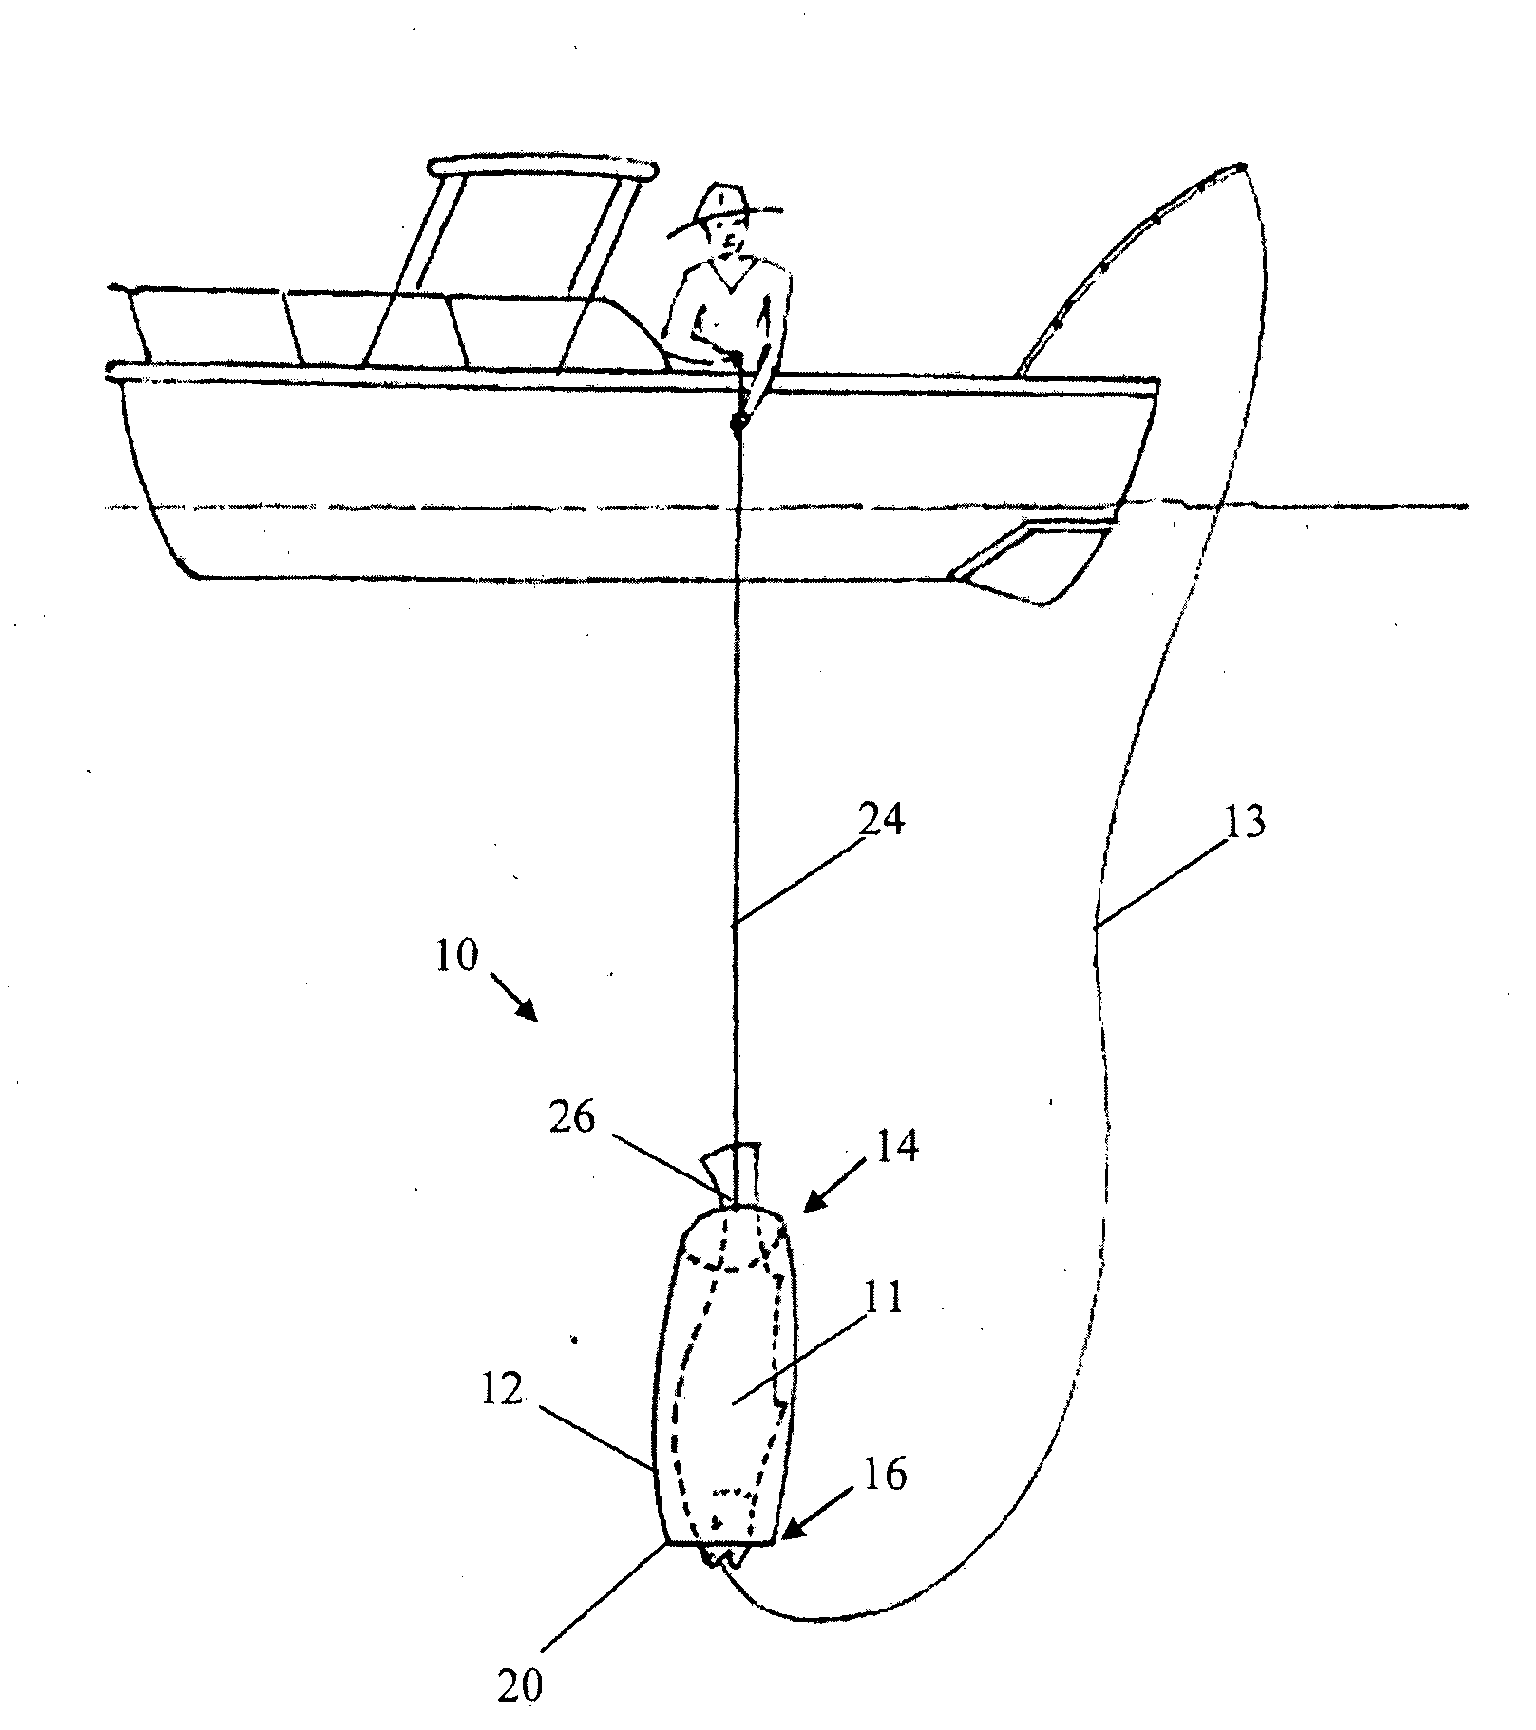 Device for retrieving fish